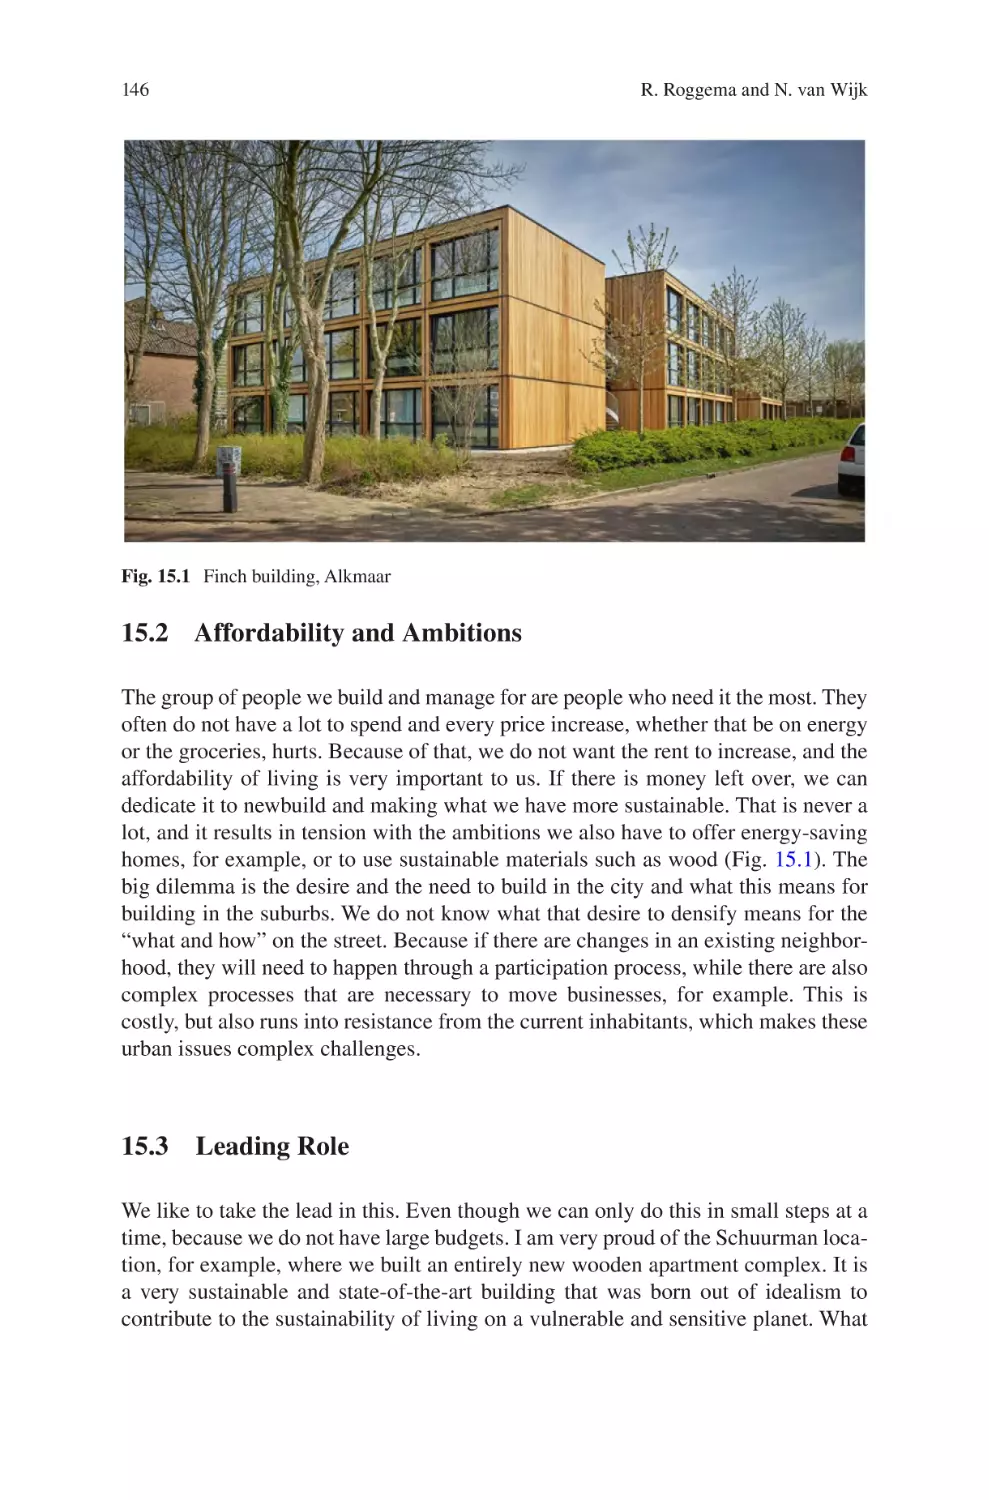 15.2 Affordability and Ambitions
15.3 Leading Role